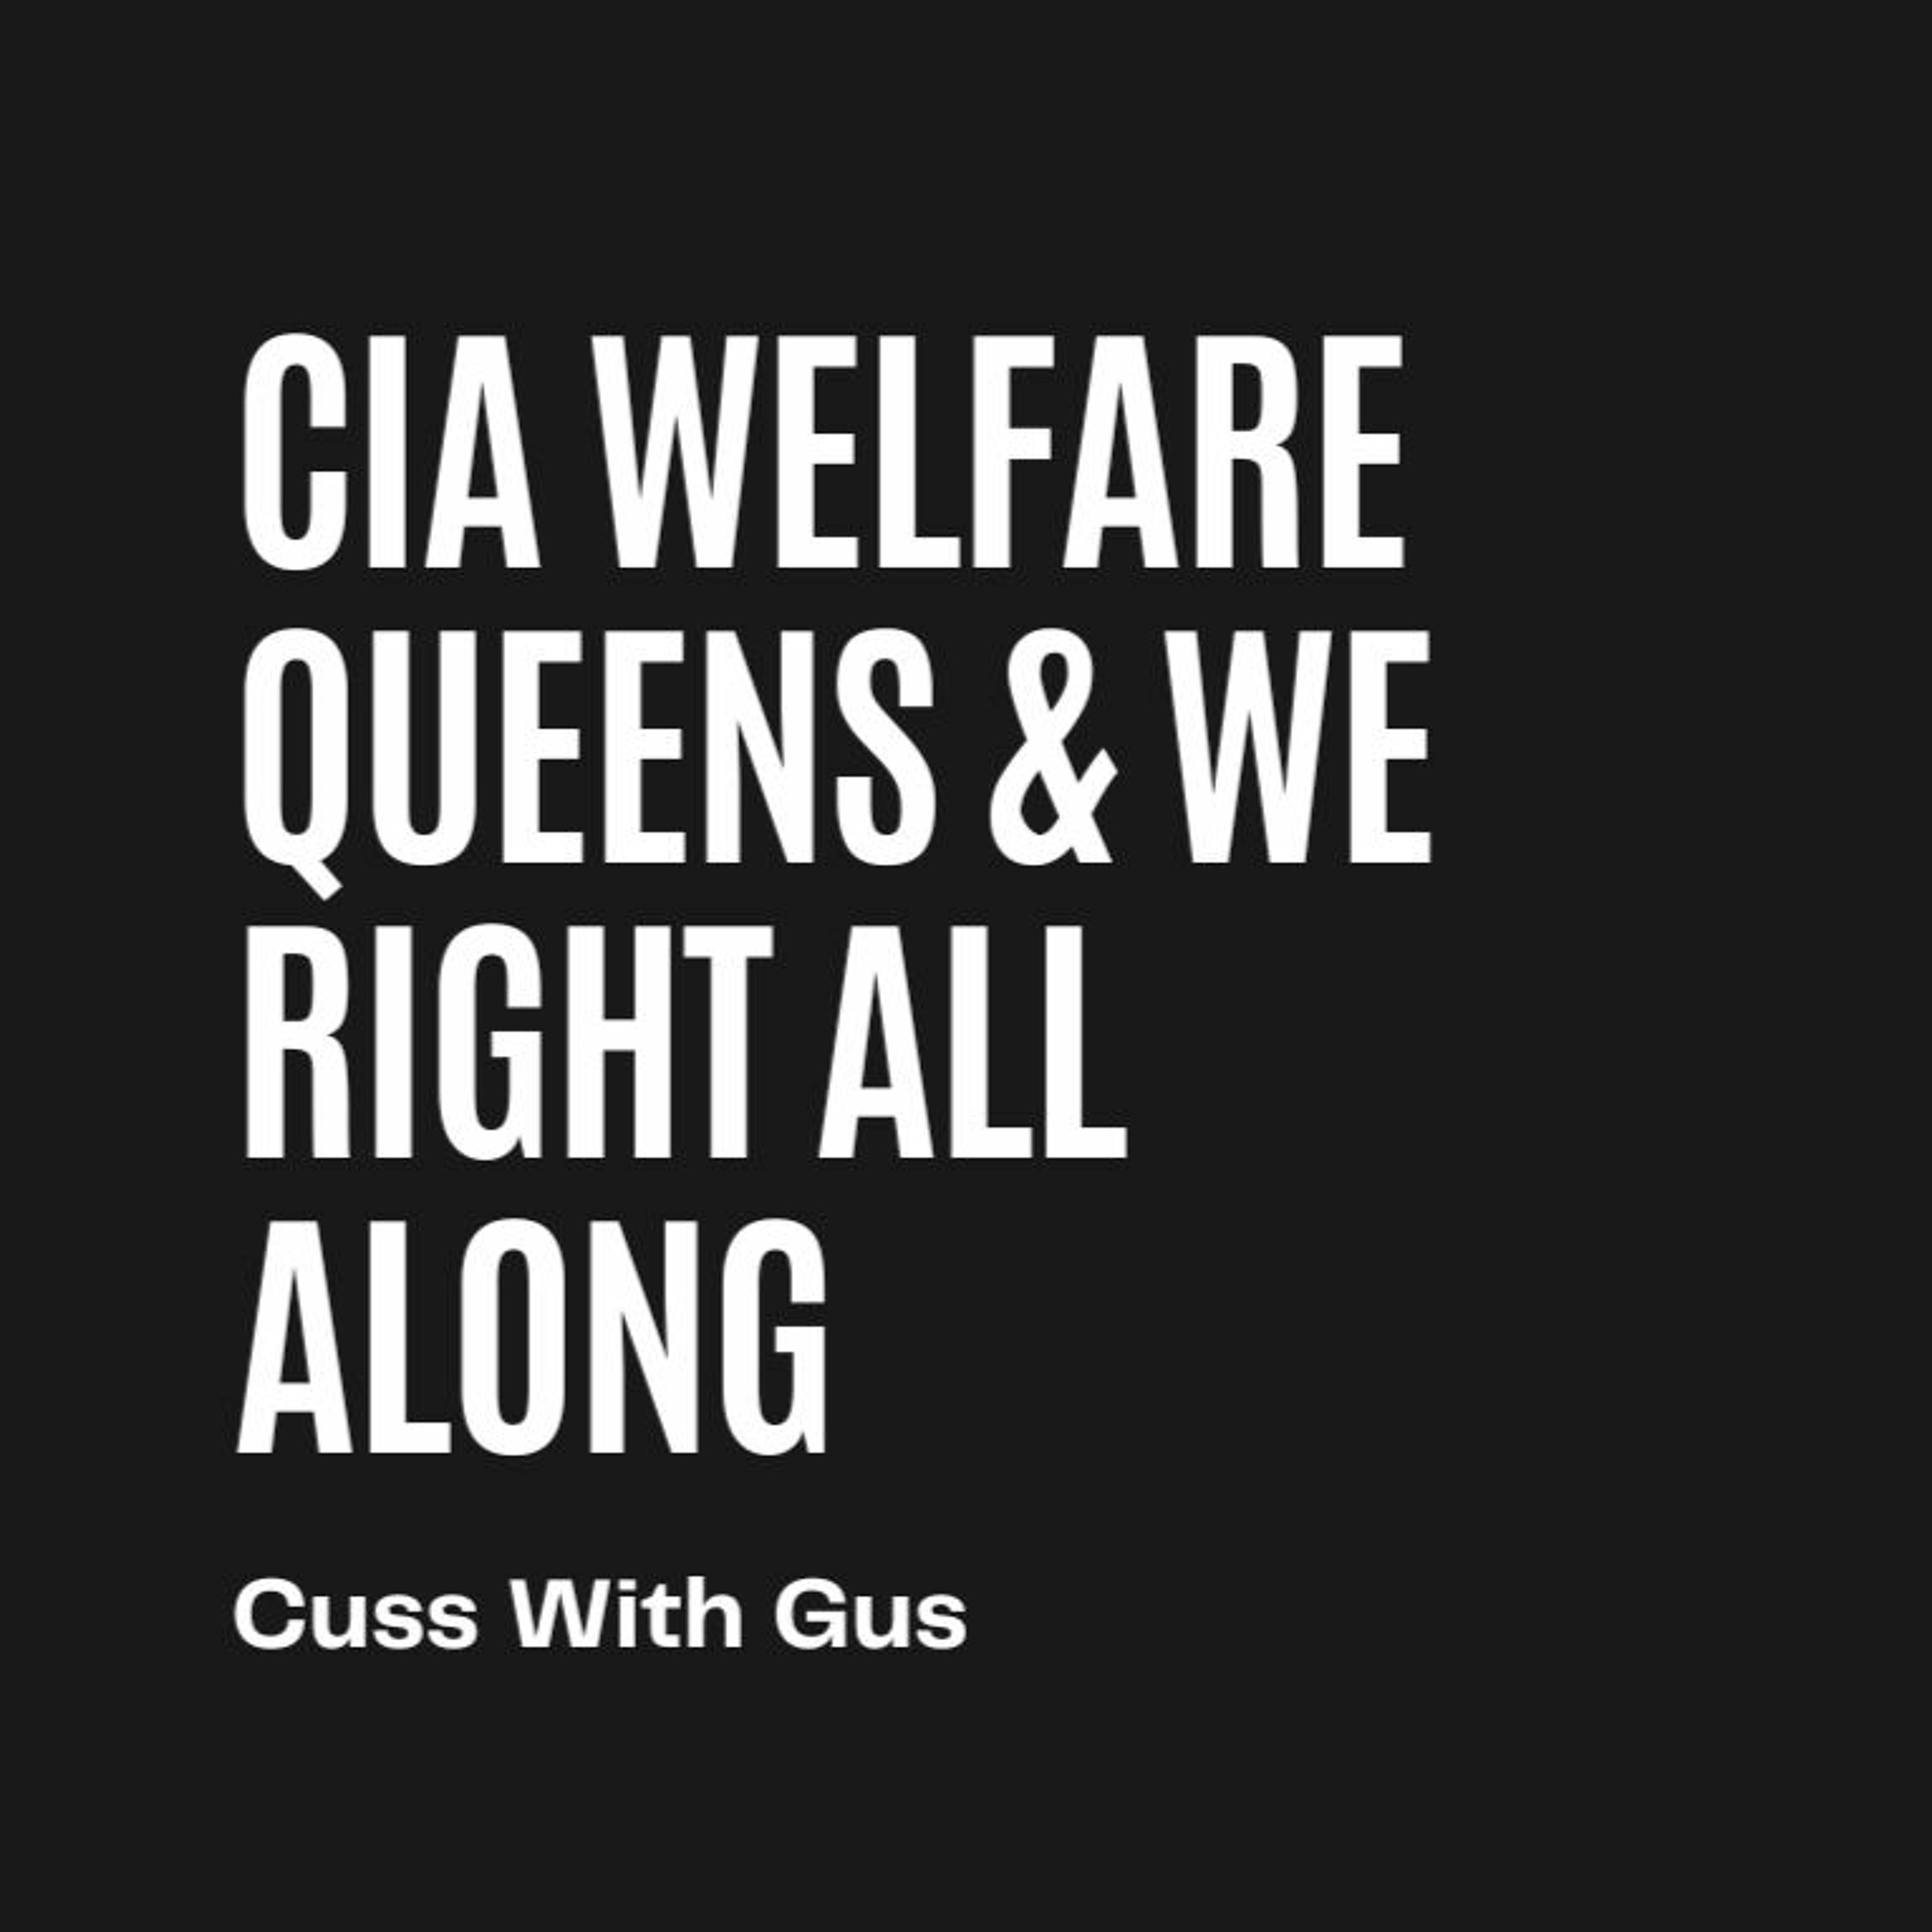 Cuss With Gus: CIA Welfare Queens & We Right All Along